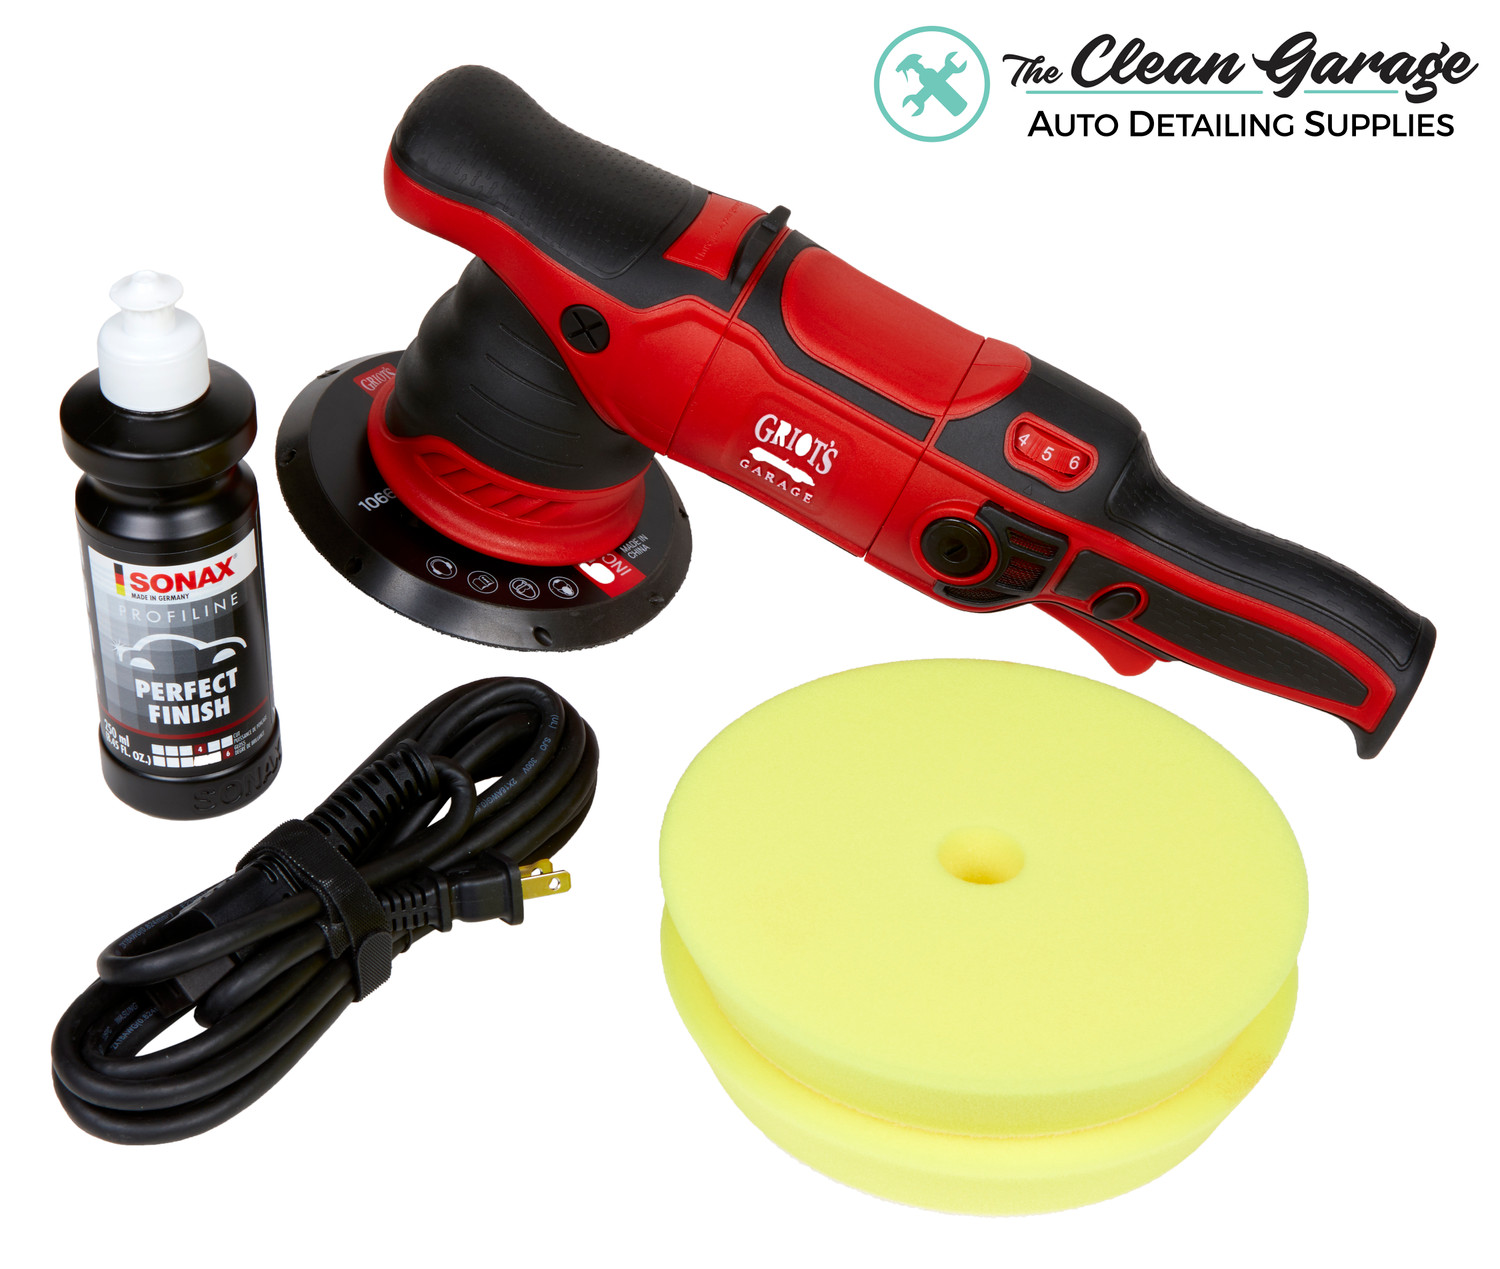 Griot's Garage G9 Polisher Kit  6 DA Backing Plate and 3 Pads Combo